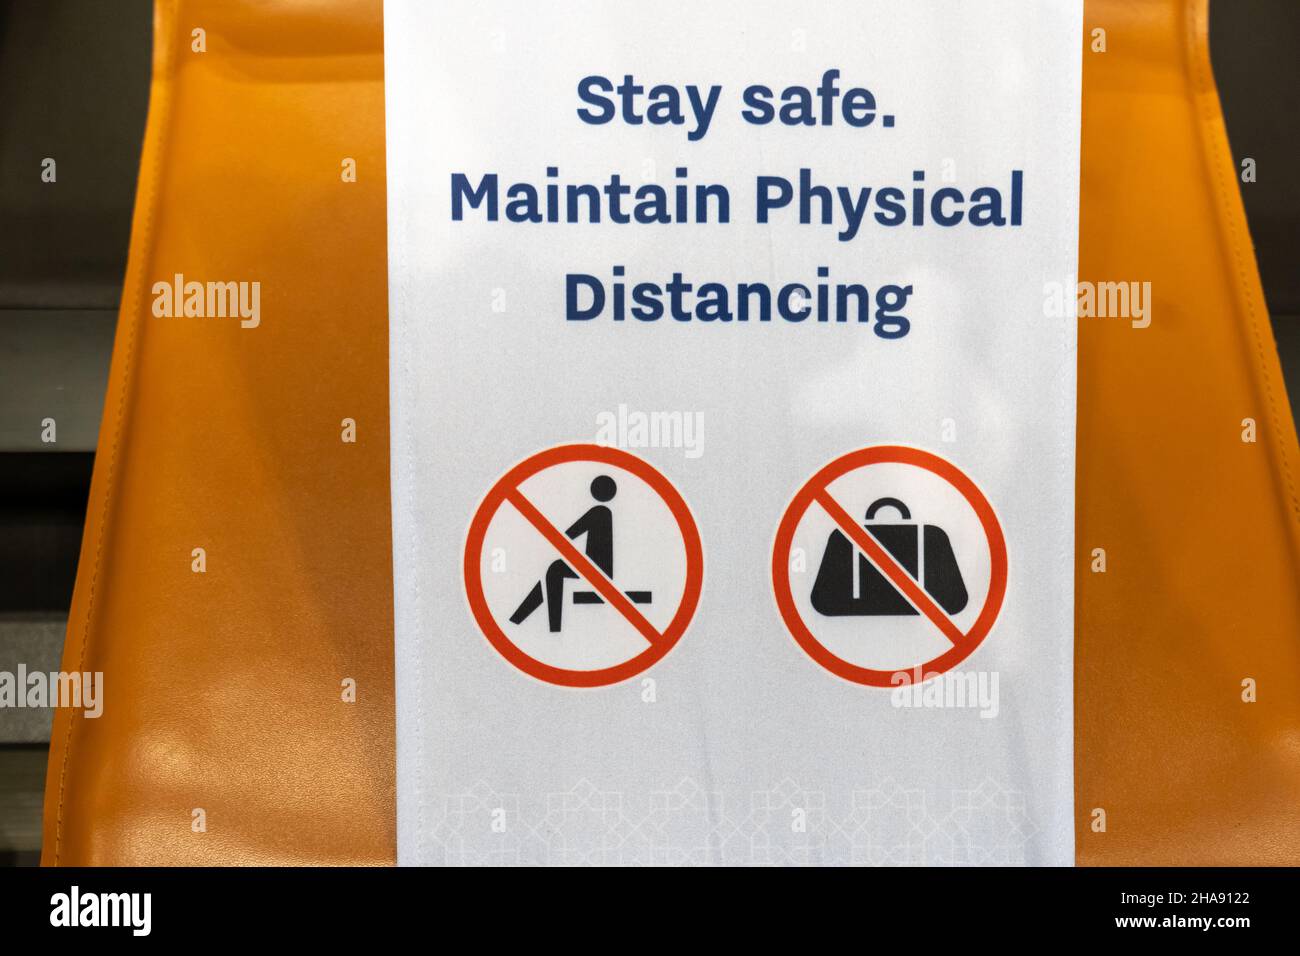 social distancing warning sign in airport due to COVID 19 coronavirus pandemic. Stock Photo